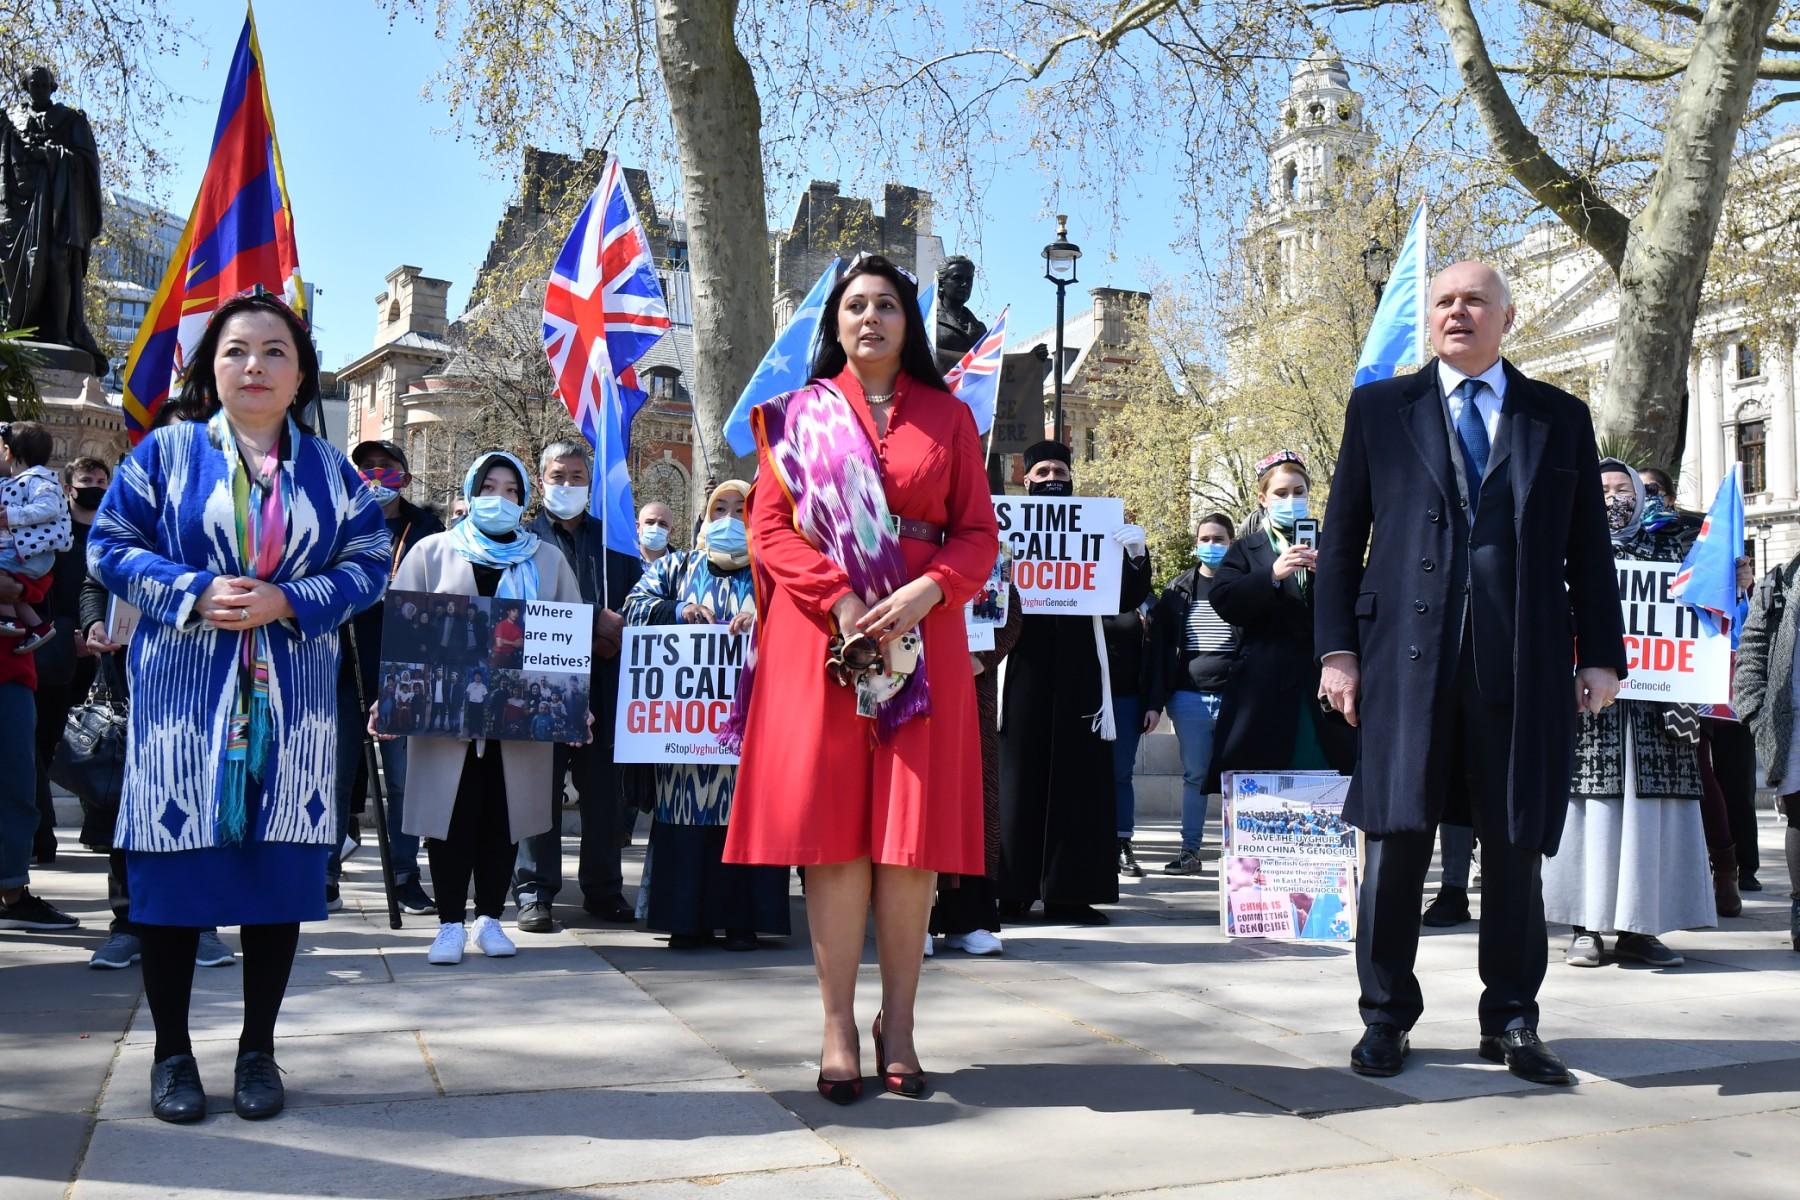 British Conservative Party MPs Nusrat Ghani (centre) and Iain Duncan Smith (right) join members of the Uighur community as they demonstrate to call on the British parliament to vote to recognise alleged persecution of China's Muslim minority Uighur people as genocide and crimes against humanity in London in this April 22, 2021 file photo. Photo: AFP